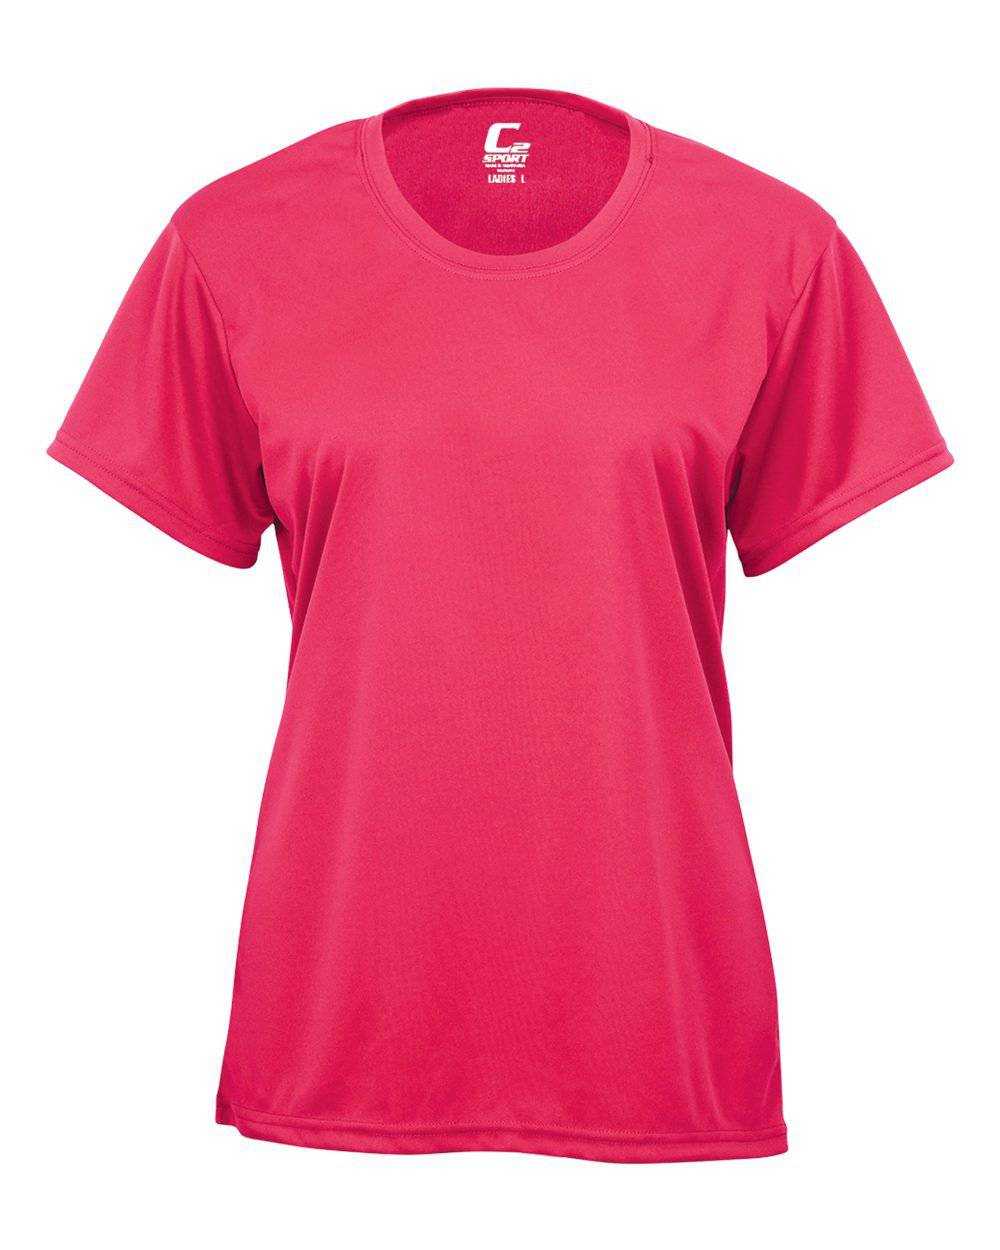 C2 Sport 5600 Ladies Tee - Hot Pink - HIT a Double - 1